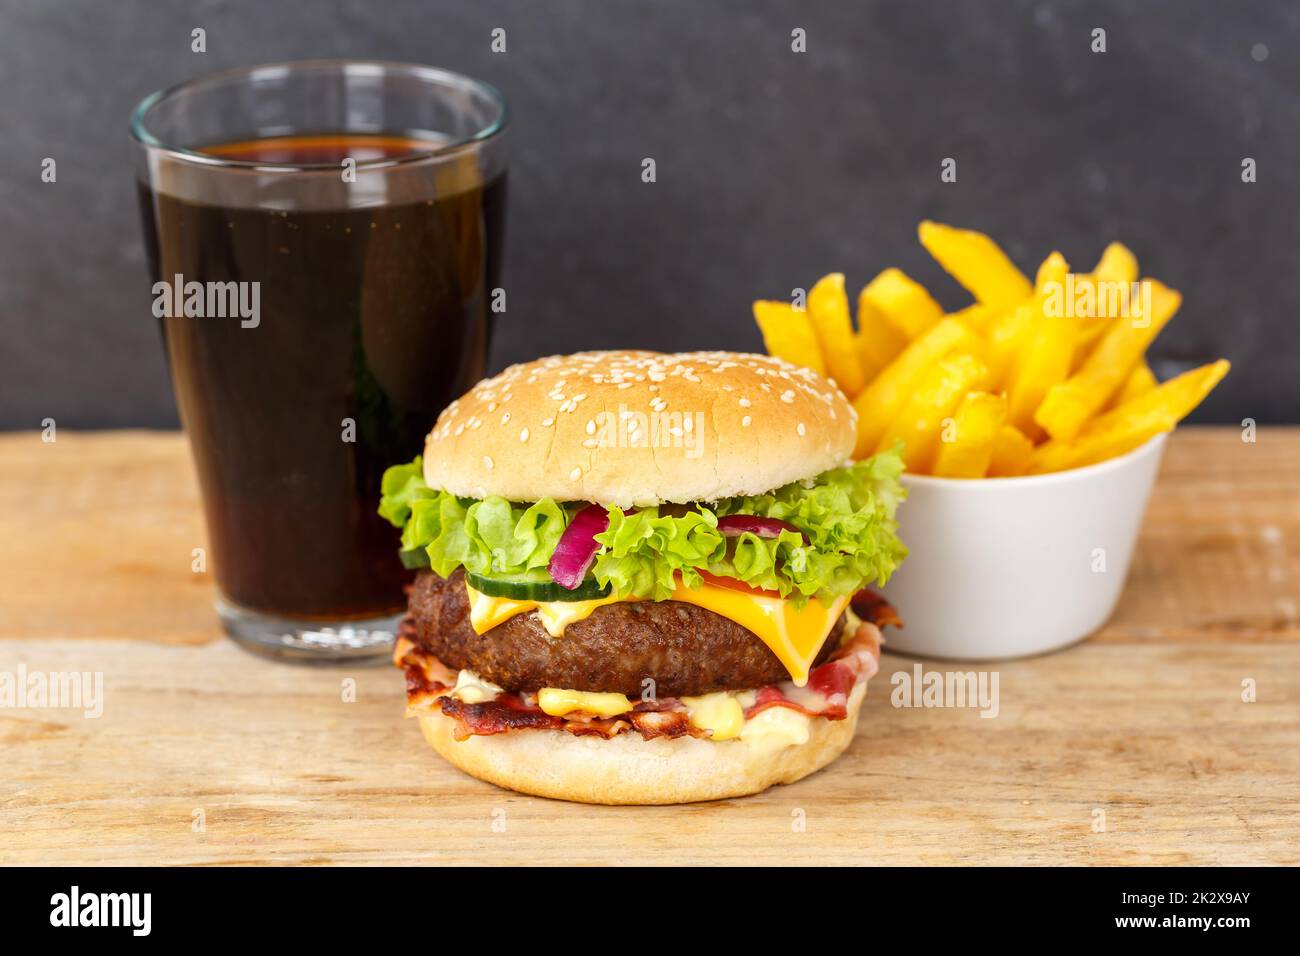 Hamburger Cheeseburger meal fastfood fast food with cola drink and French Fries on a wooden board menu Stock Photo